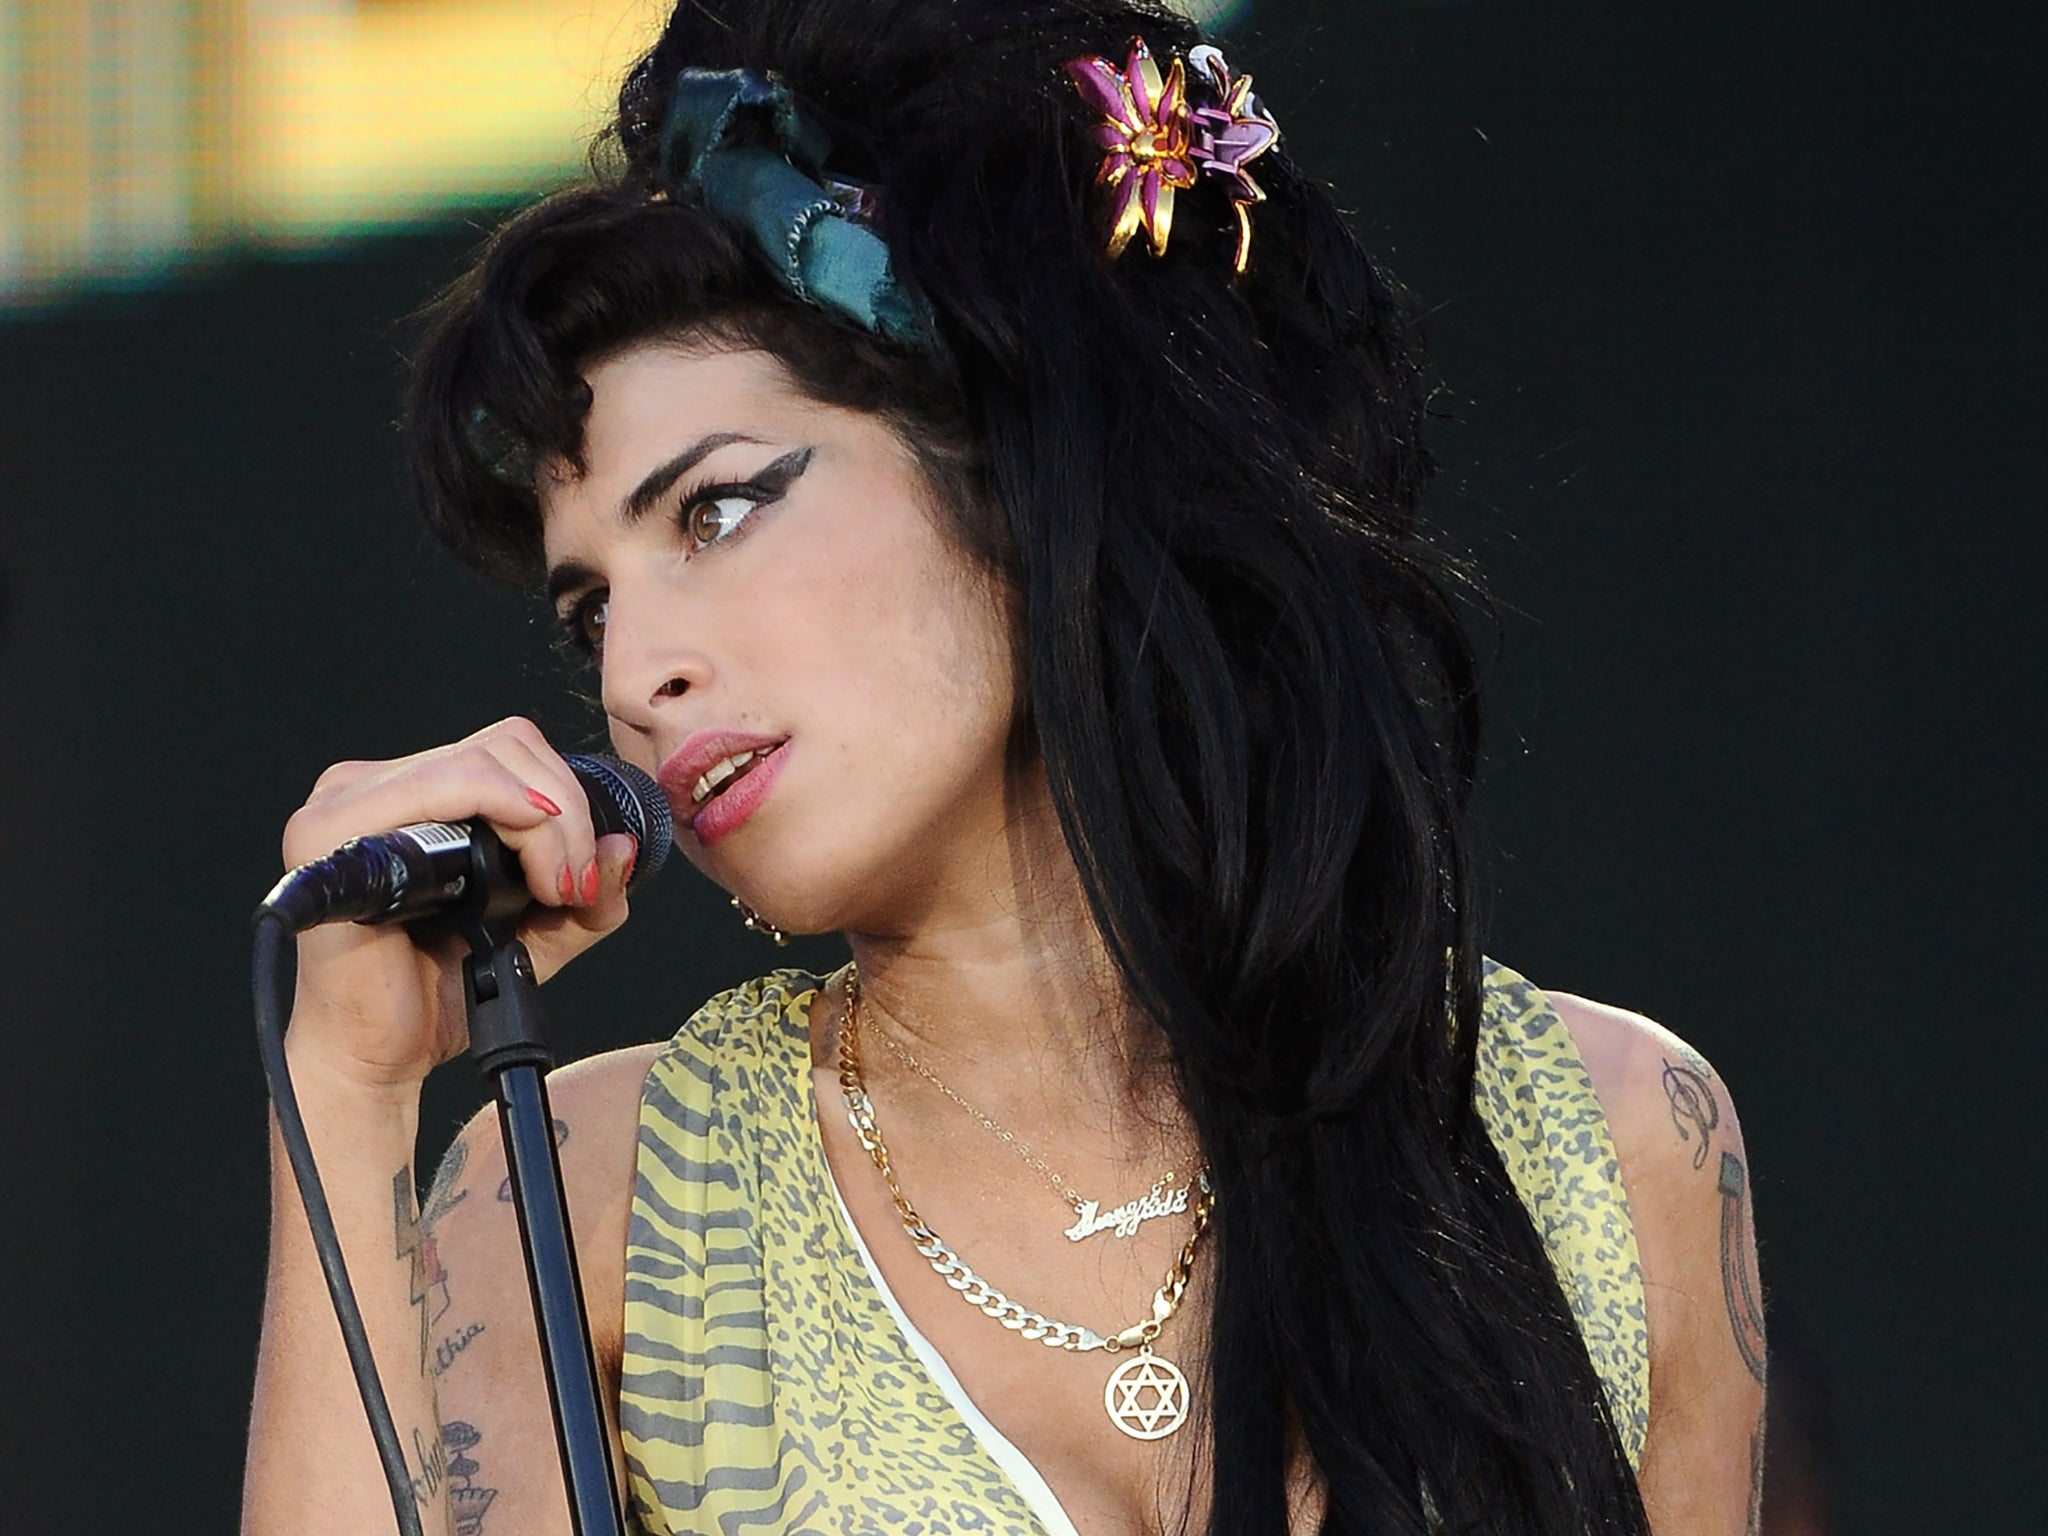 Video. Take a first look at the upcoming Amy Winehouse biopic